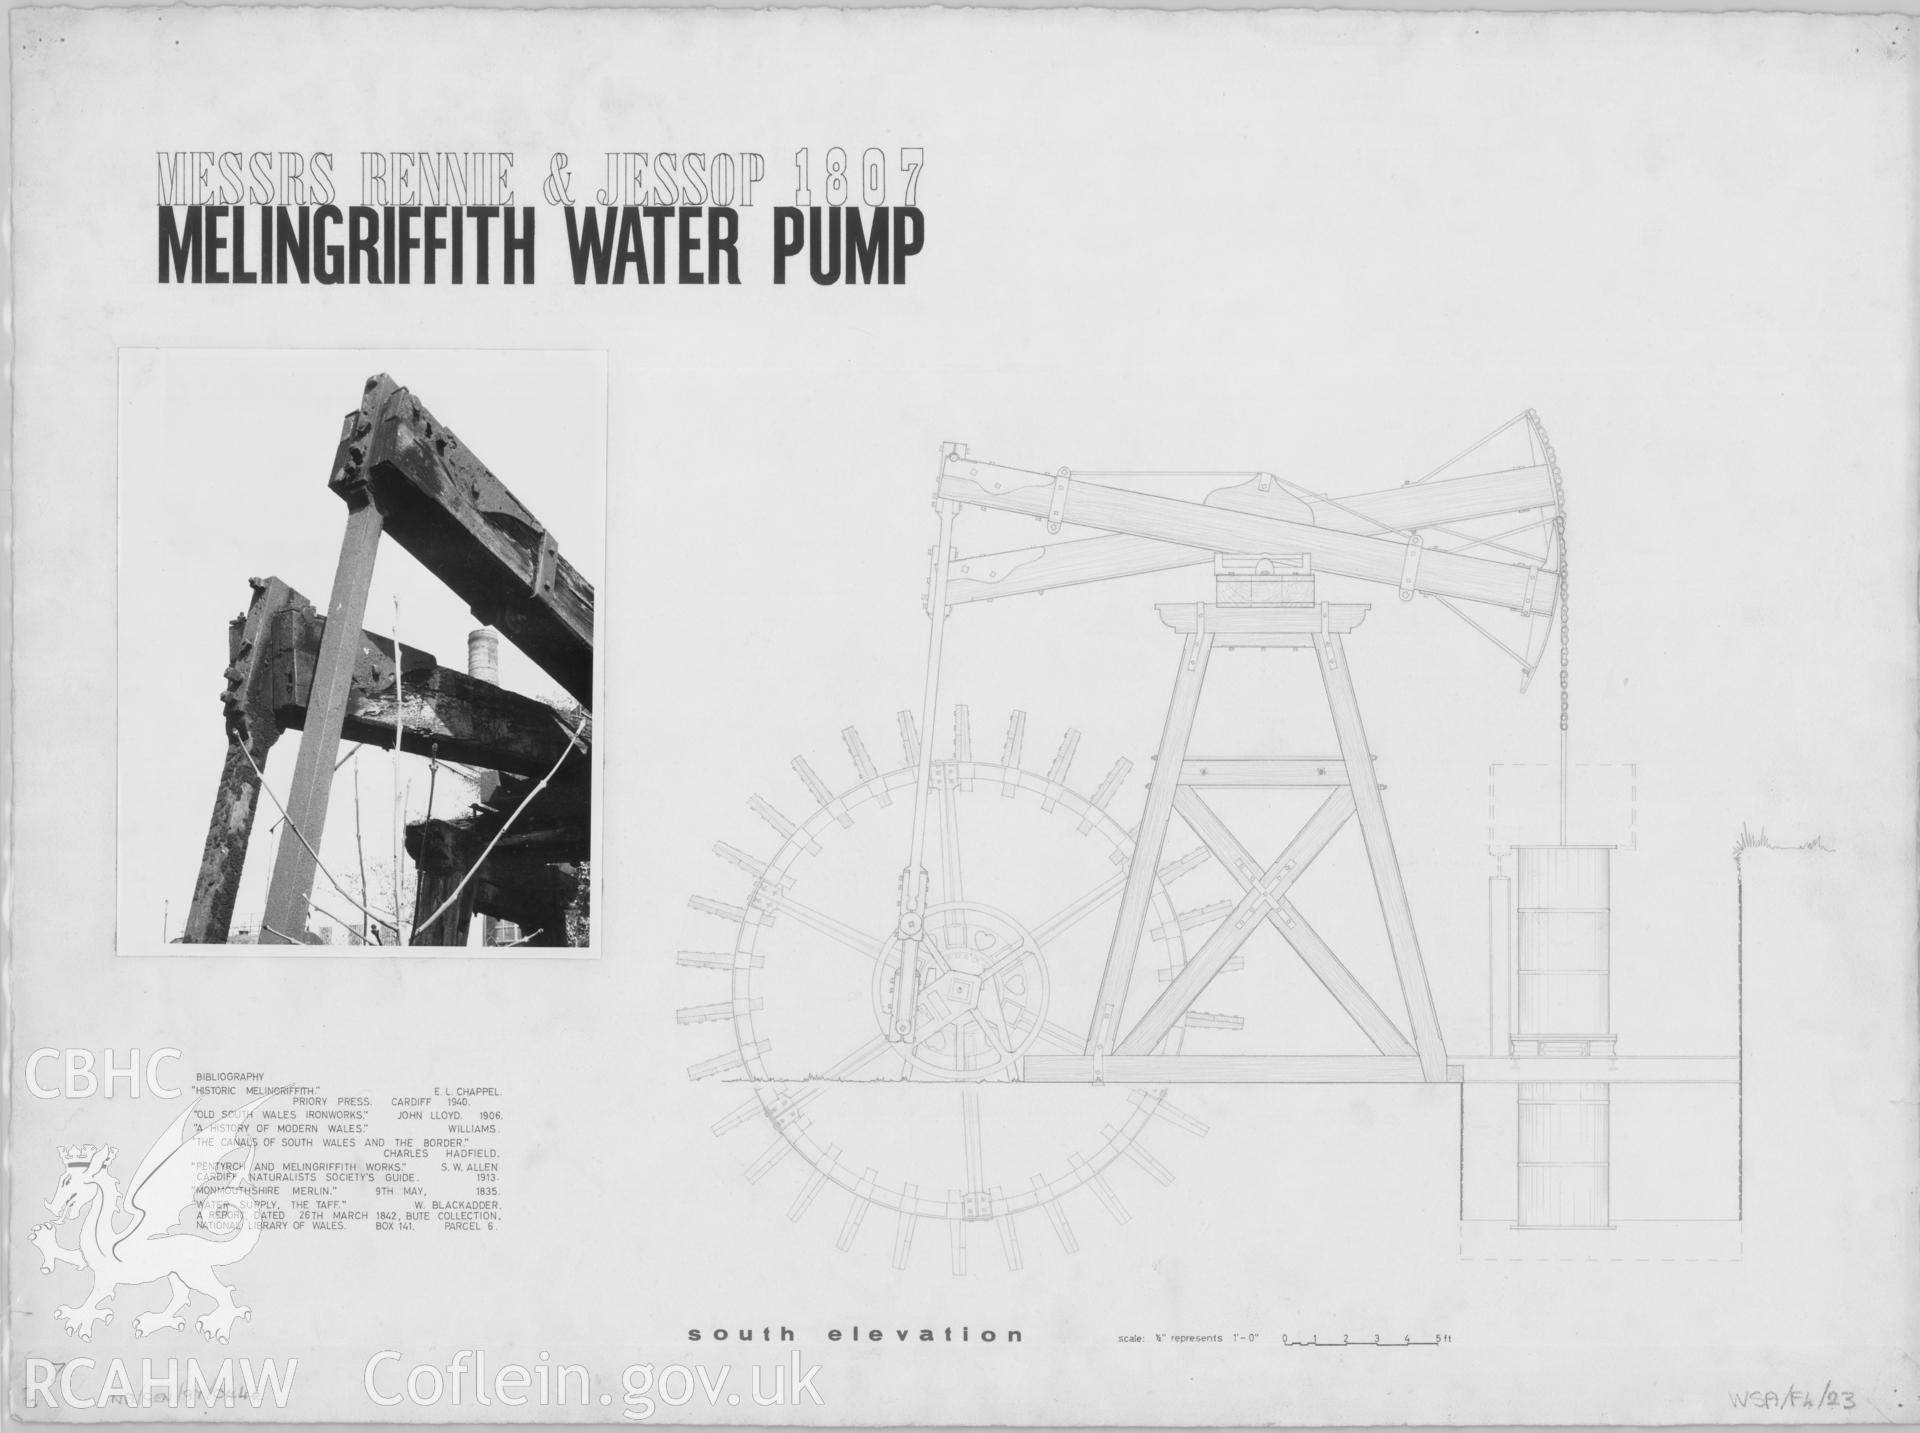 Measured drawing showing south elevation and B&W photo of Melingriffith Water Pump, produced by R.V. Bayliss and I.Payne, undated.